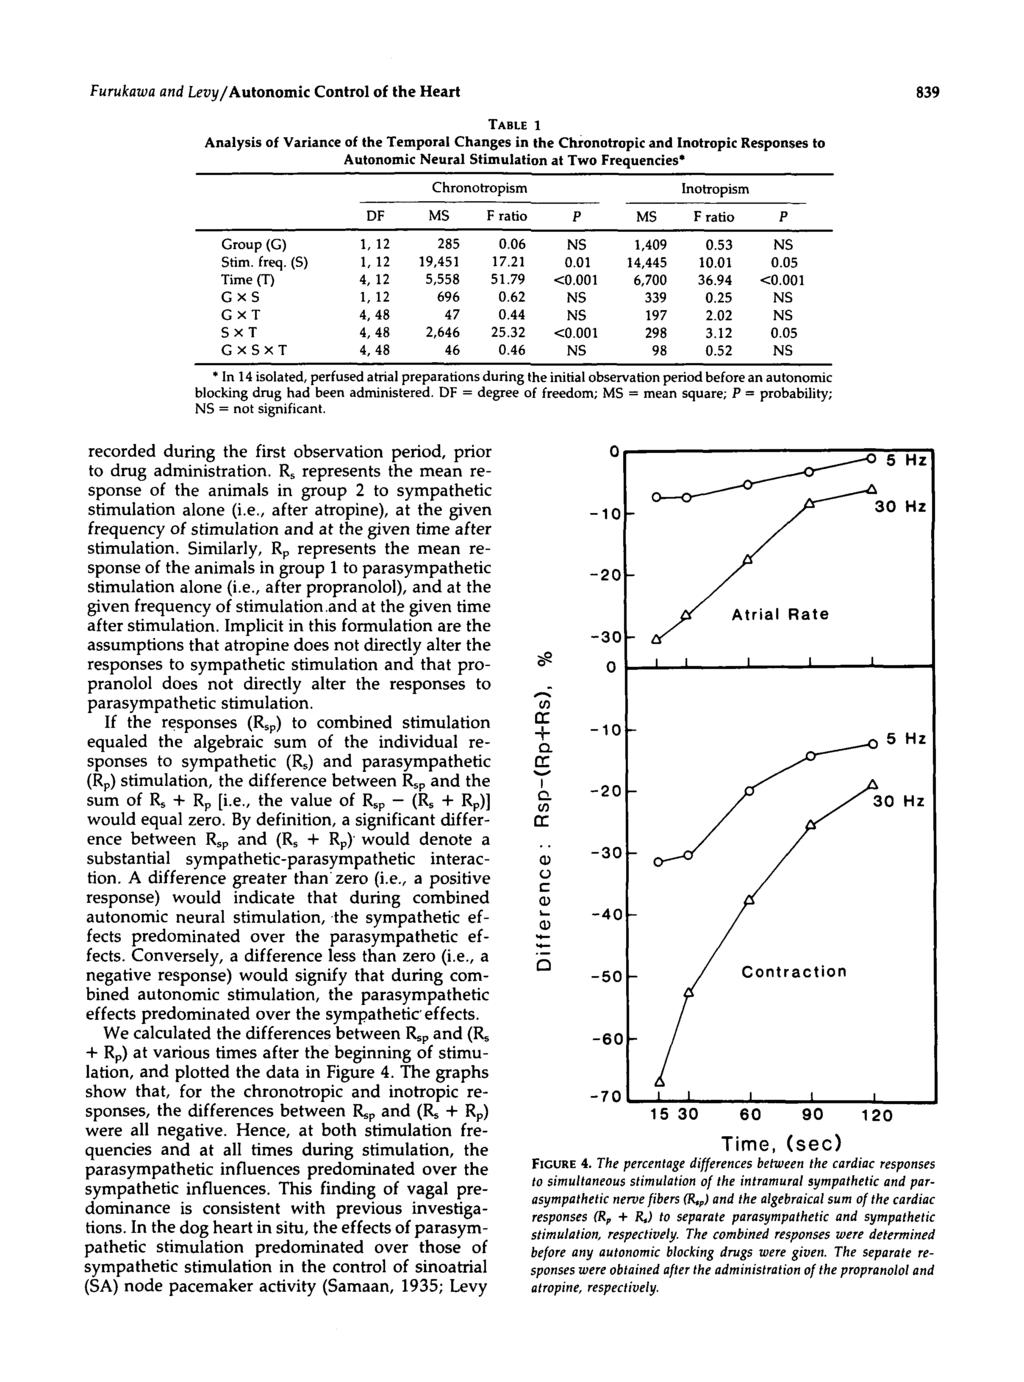 Furukawa and Levy/Autonomic Control of the Heart 839 TABLE 1 Analysis of Variance of the Temporal Changes in the ChronotTopic and Inotropic Responses to Autonomic Neural ulation at Two Frequencies*